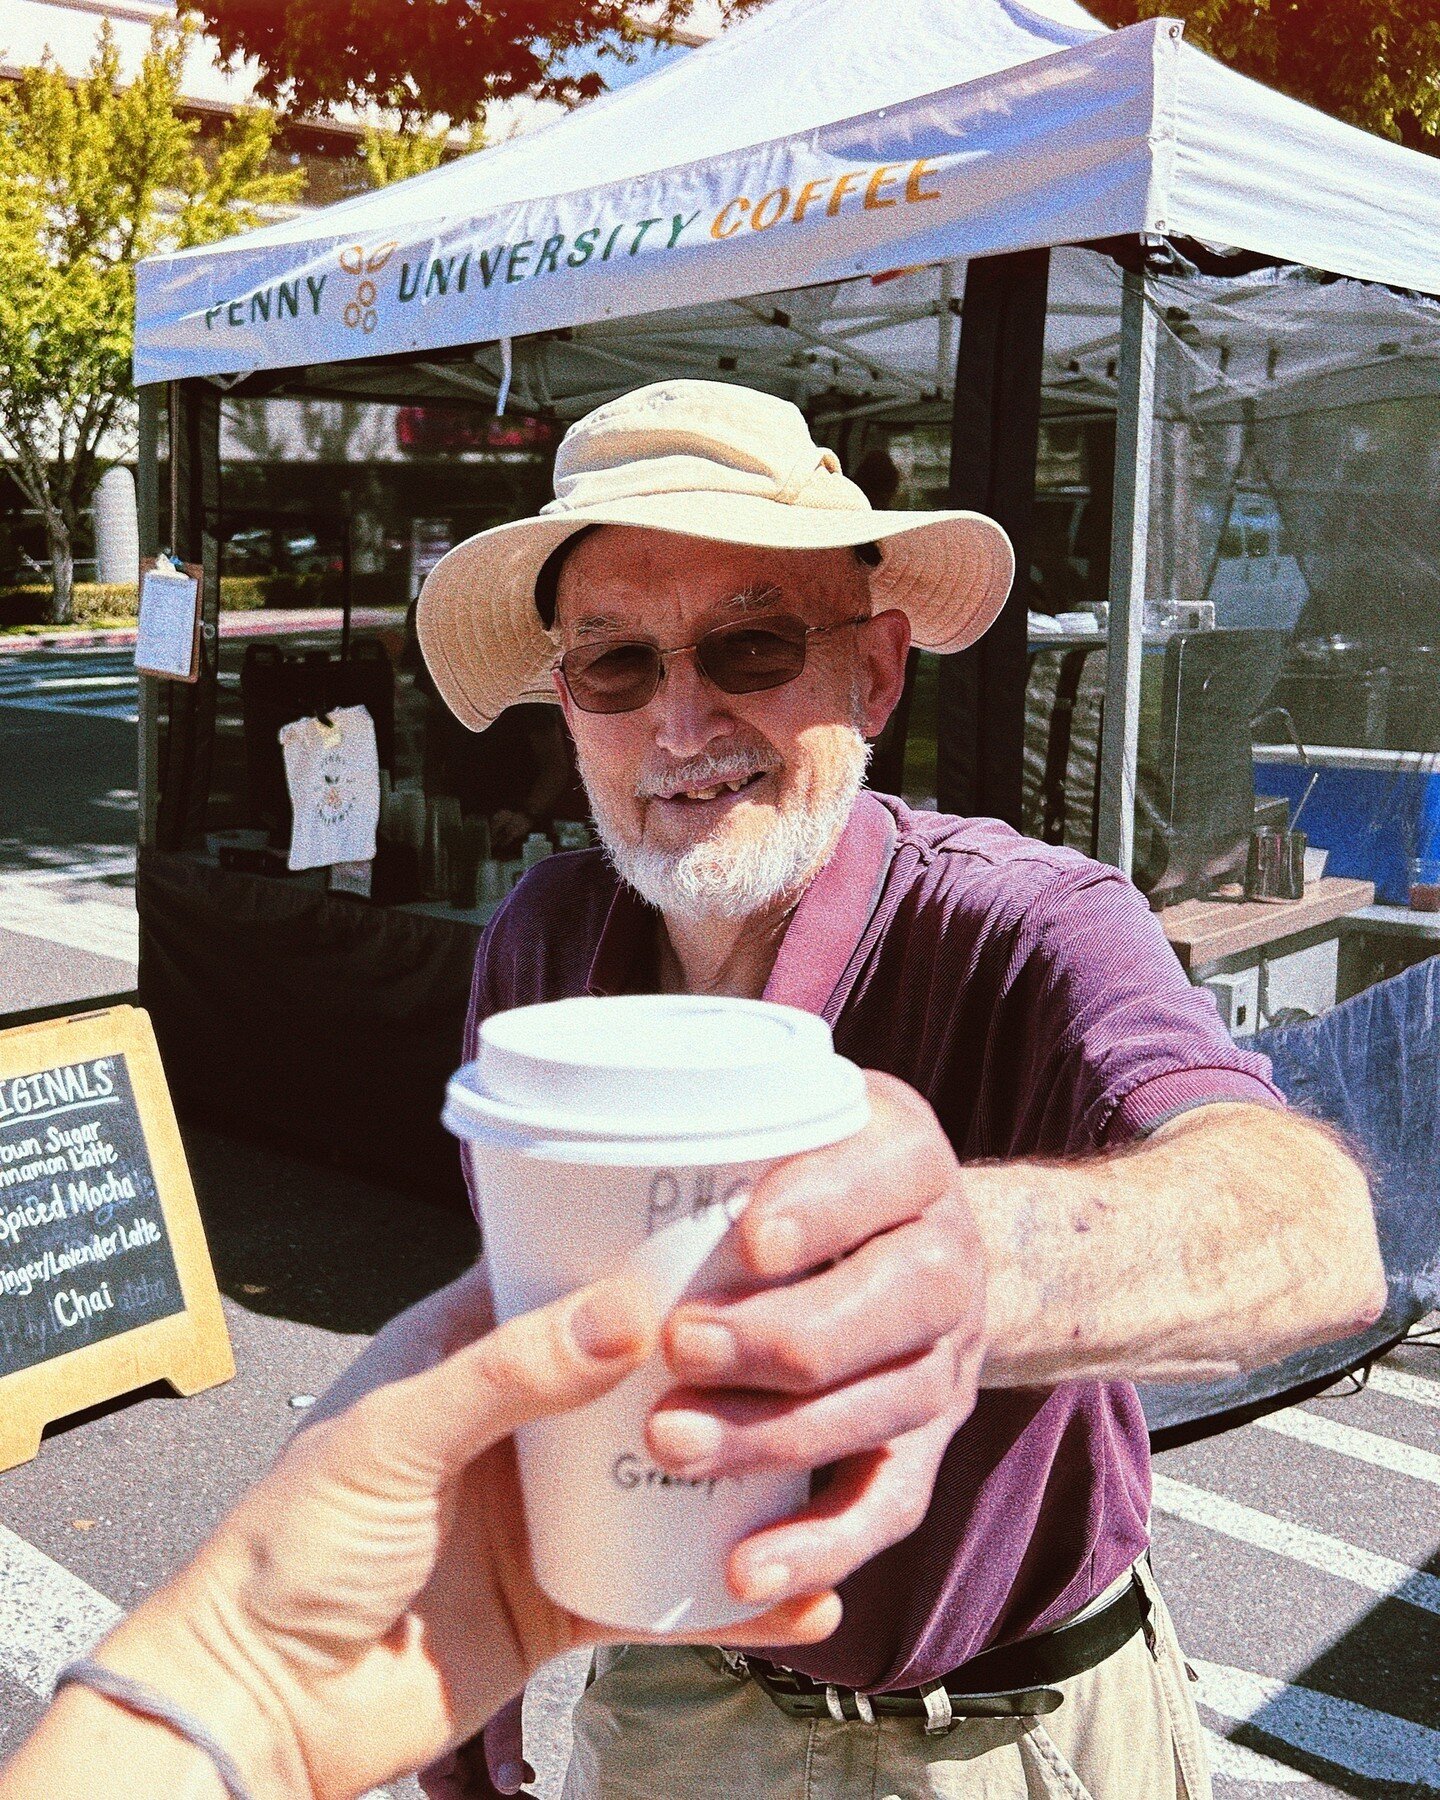 If you've ever wondered who the Papa in &quot;Papa's Hot Chocolate&quot; was here he is all the way from Washington state getting to try it for the first time! 

Visit us at the market next week and try it yourself 😋 We can make it hot or as chocola